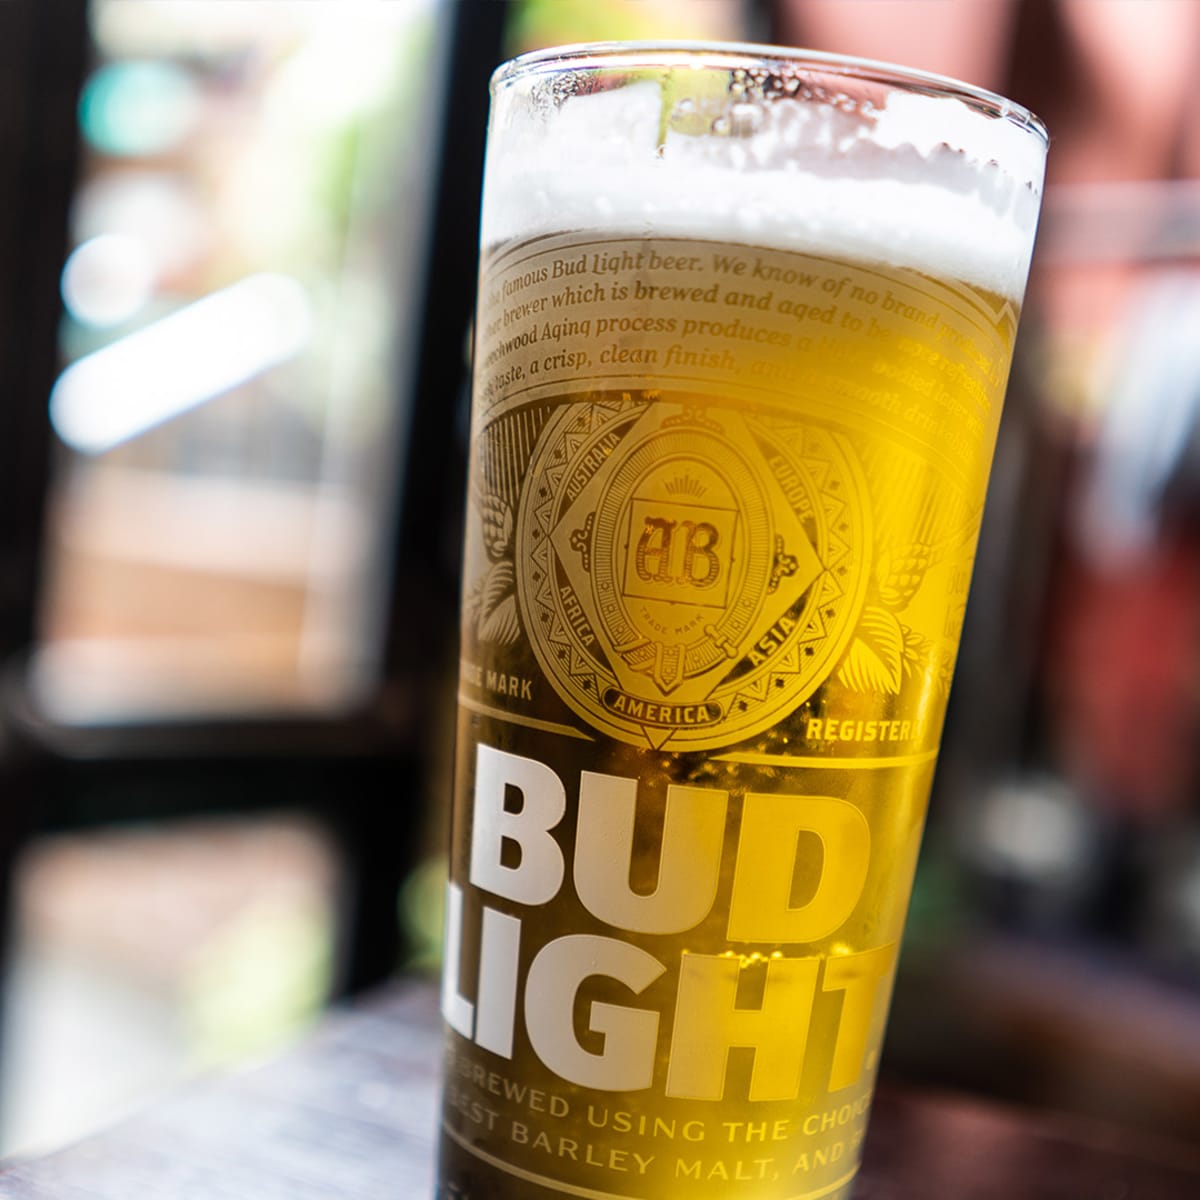 Beyond Bud Light: Another beer brand files Chapter 11 bankruptcy - TheStreet